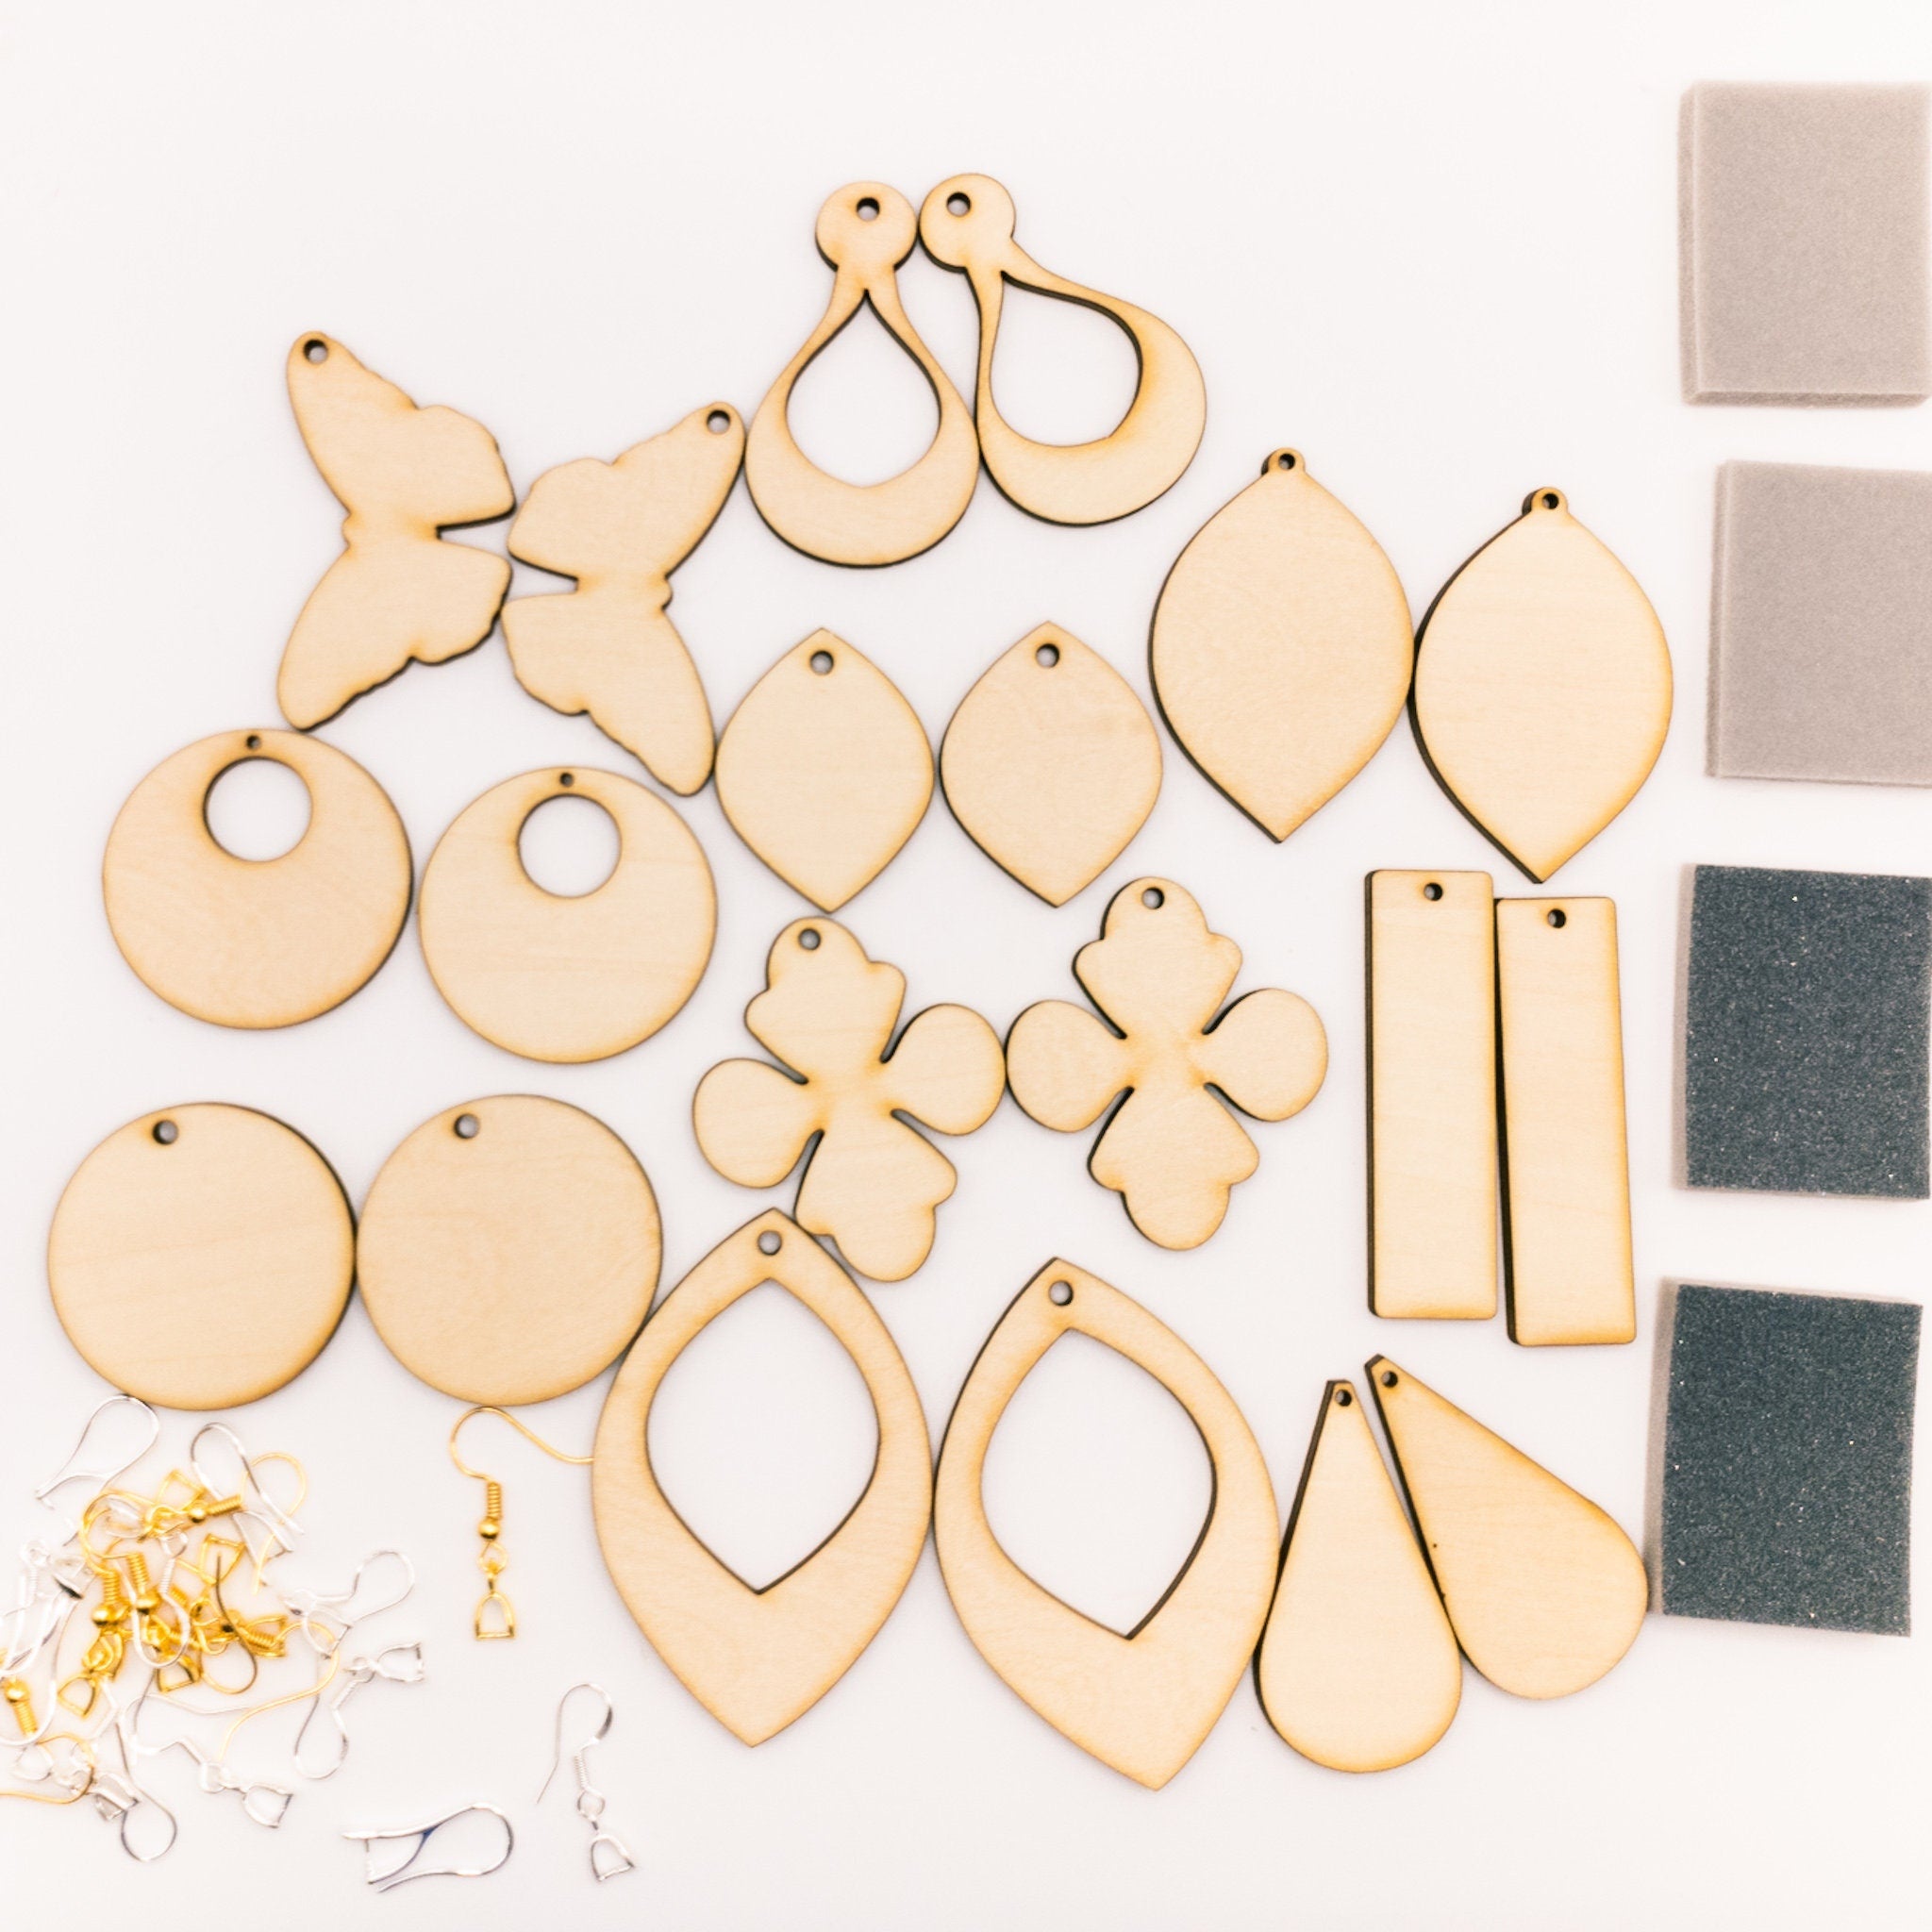 DIY Earring Making Kit, wooden blanks for sublimation earrings and pai